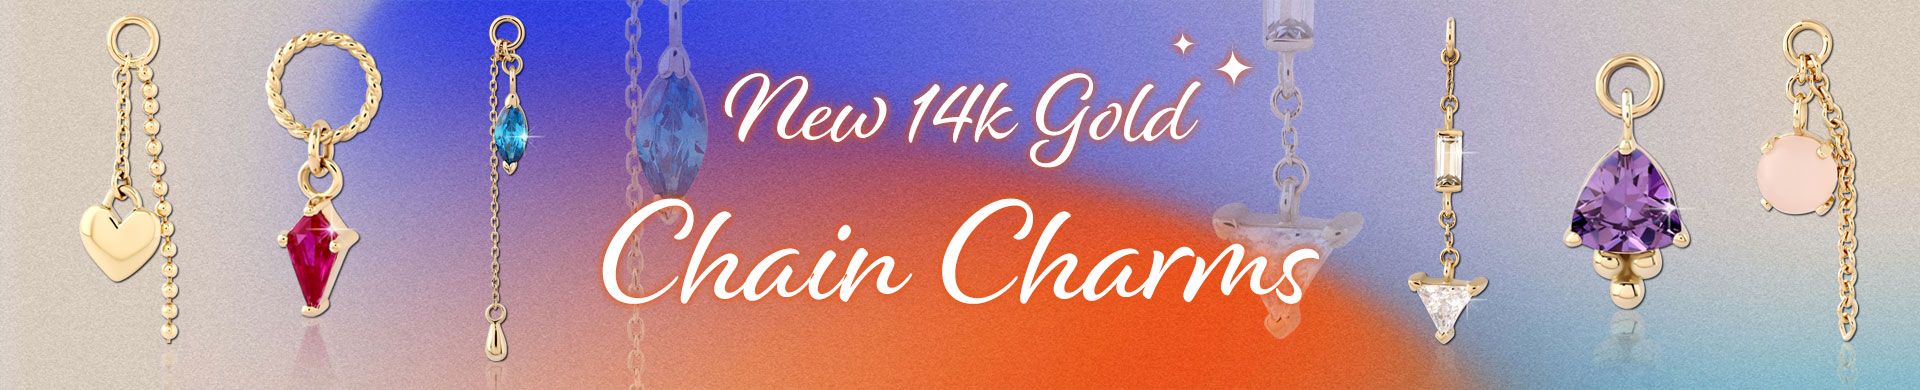 14K Gold charms